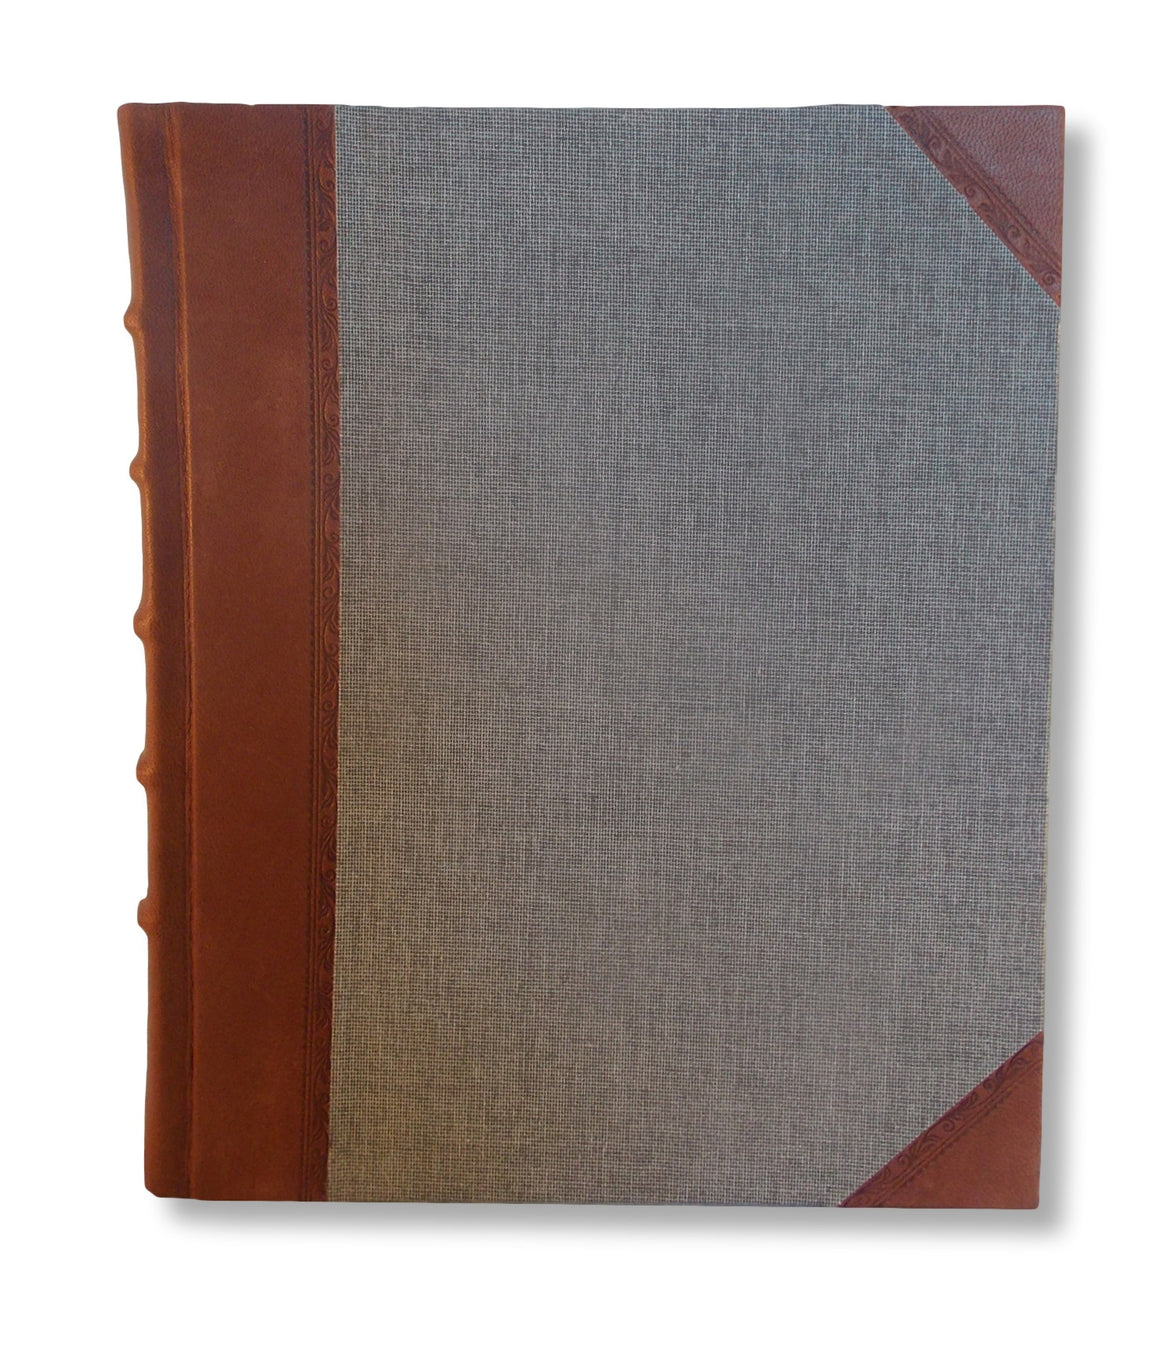 A classic leather photo album featuring brown leather spine with hand tooling and book cloth sides